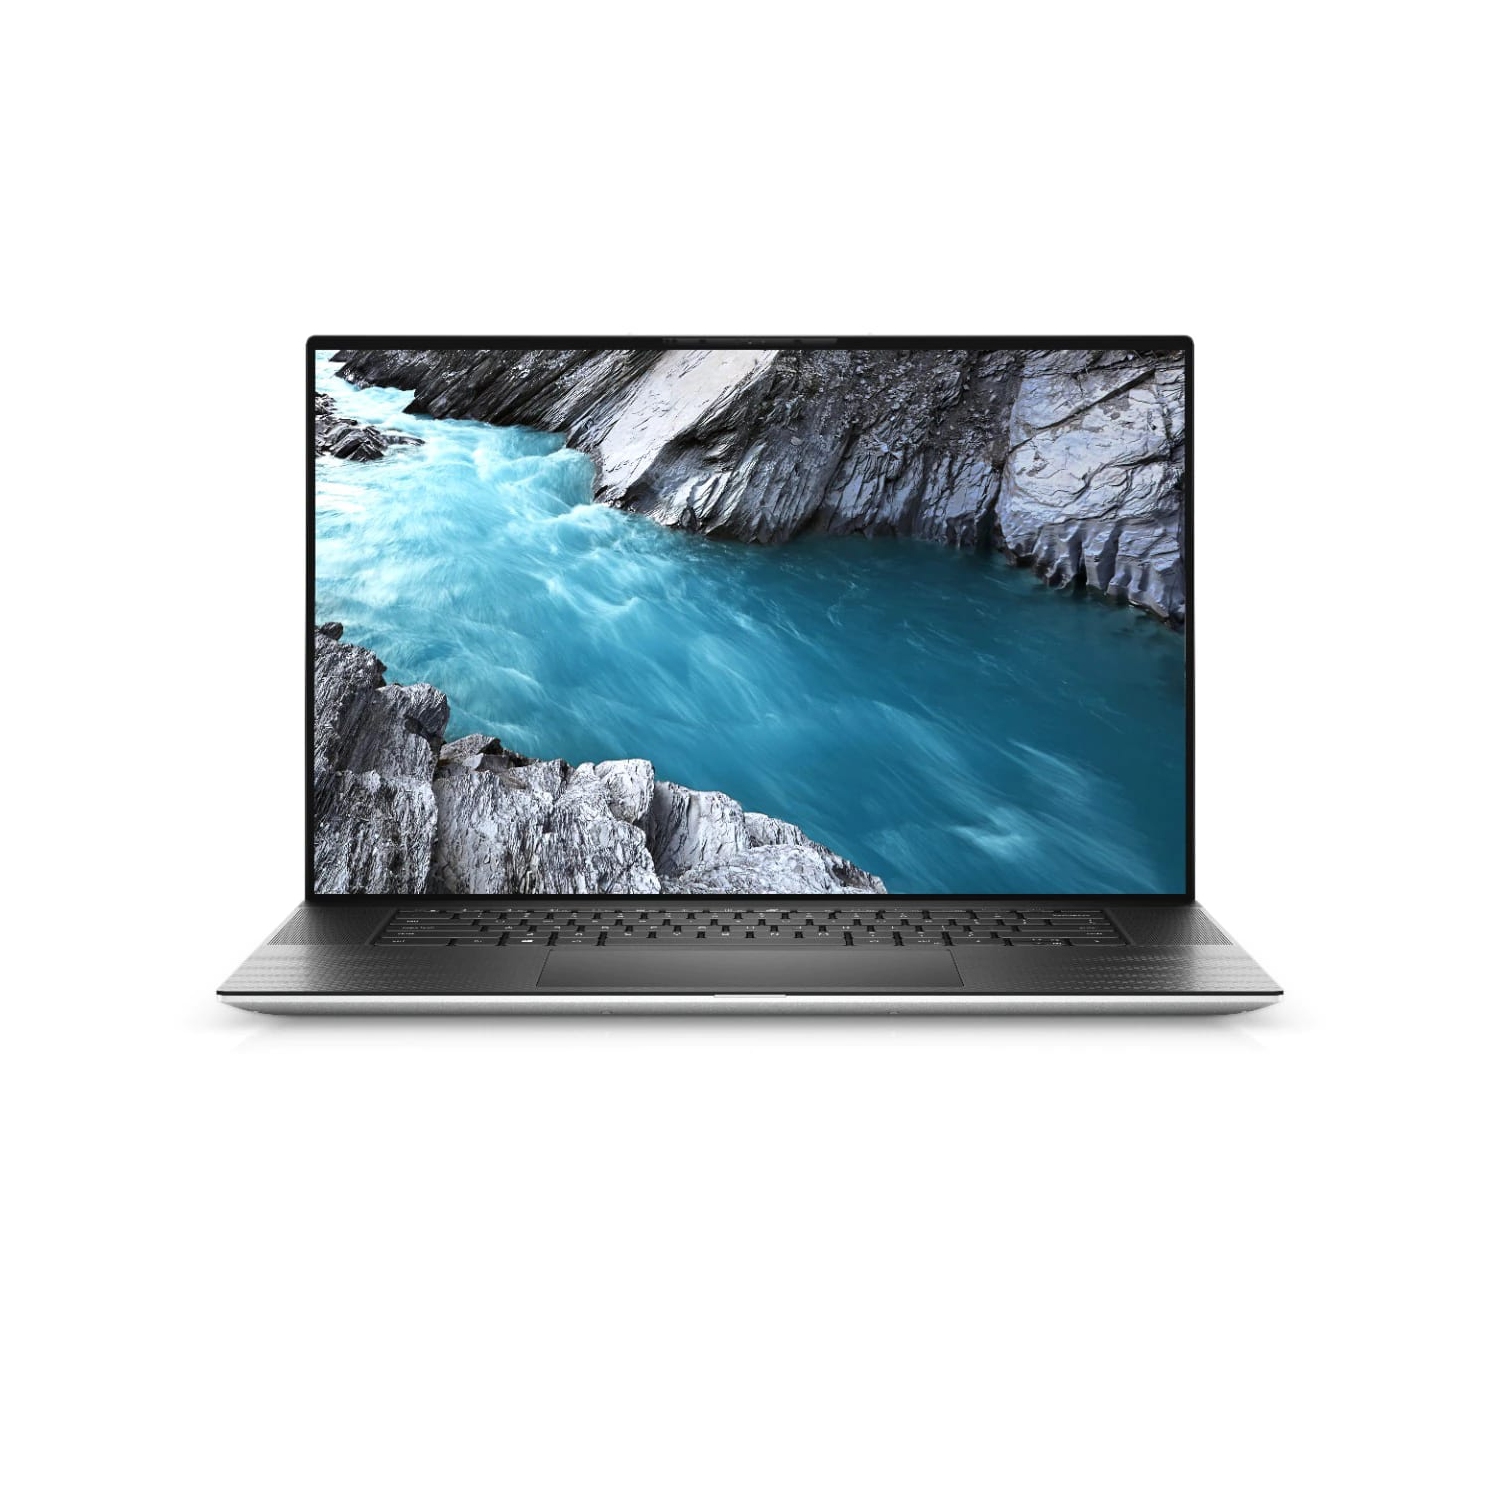 Refurbished (Excellent) - Dell XPS 17 9700 Laptop (2020) | 17" 4K Touch | Core i7 - 1TB SSD - 32GB RAM - RTX 2060 | 8 Cores @ 5.1 GHz - 10th Gen CPU Certified Refurbished